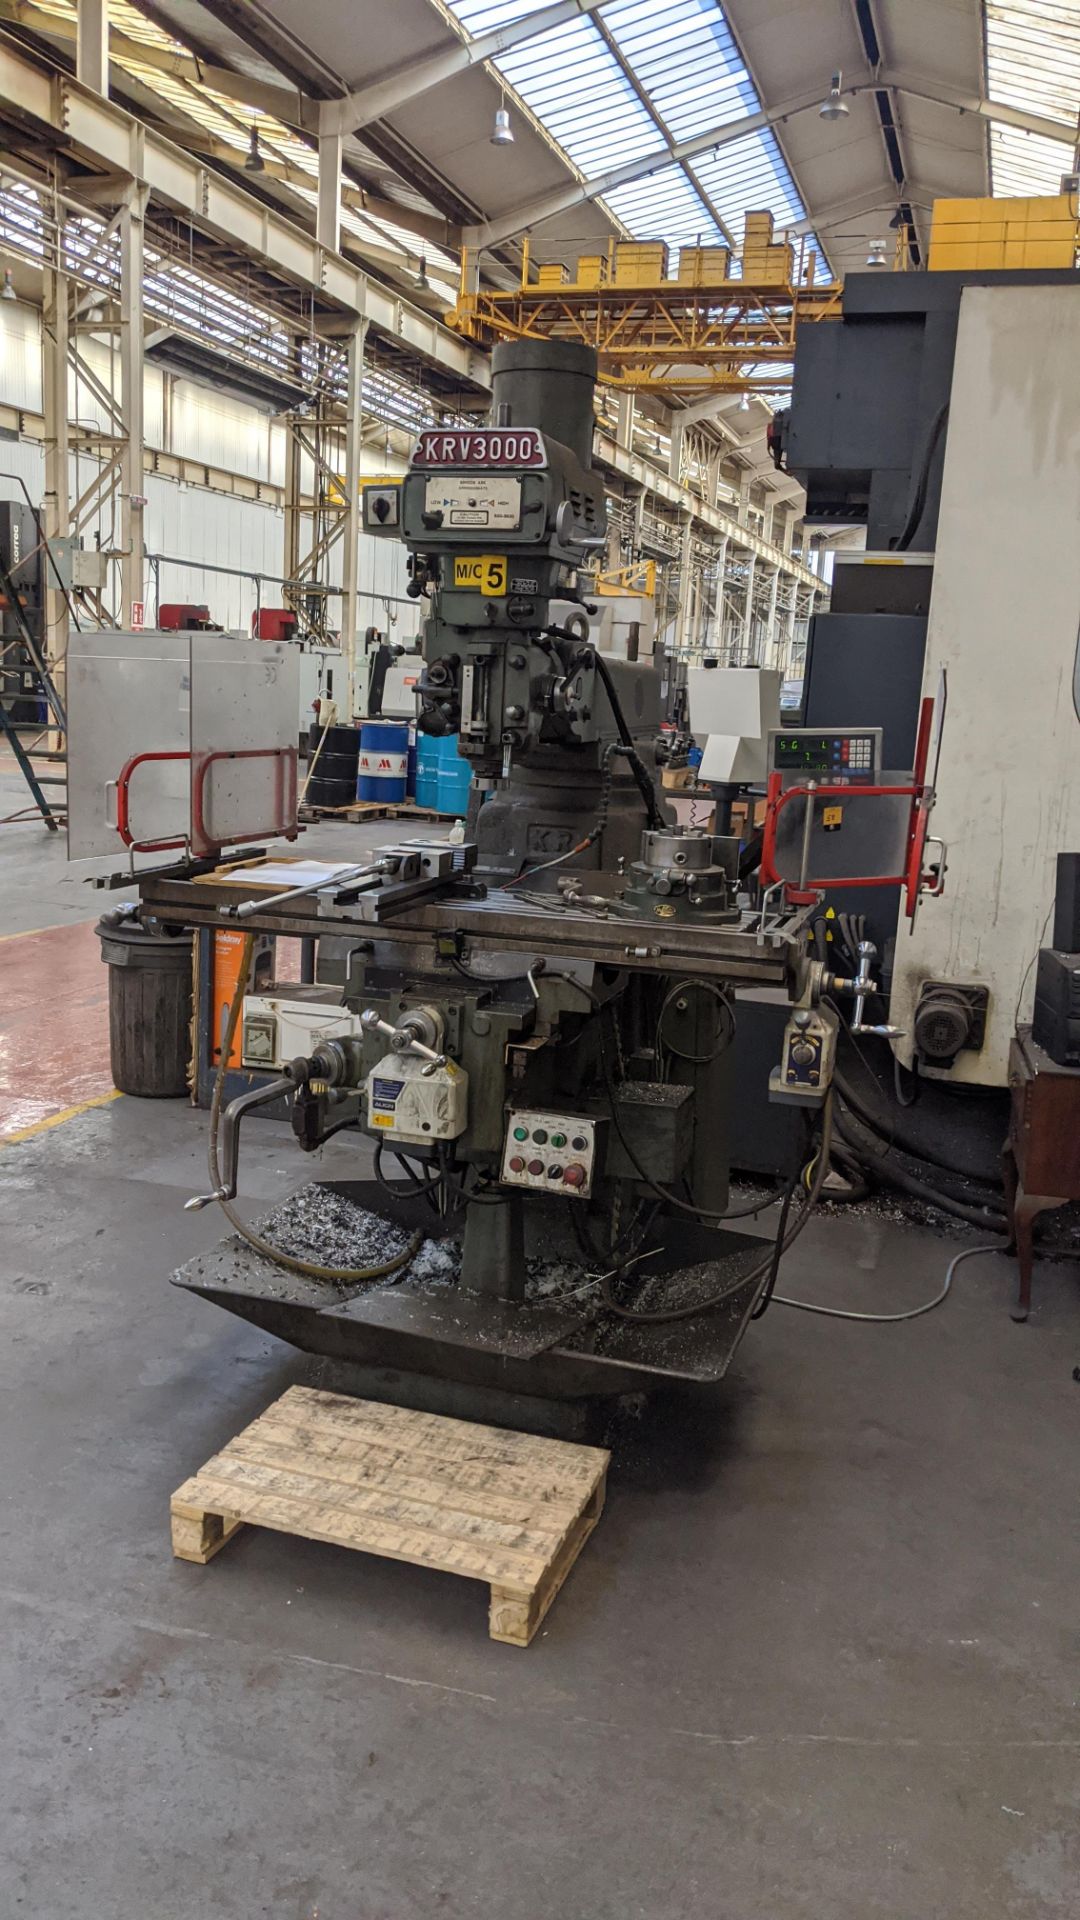 1998 King Rich KRV3000-V milling machine, serial no. 8470. Includes Newall Topaz Mill controller. - Image 4 of 15